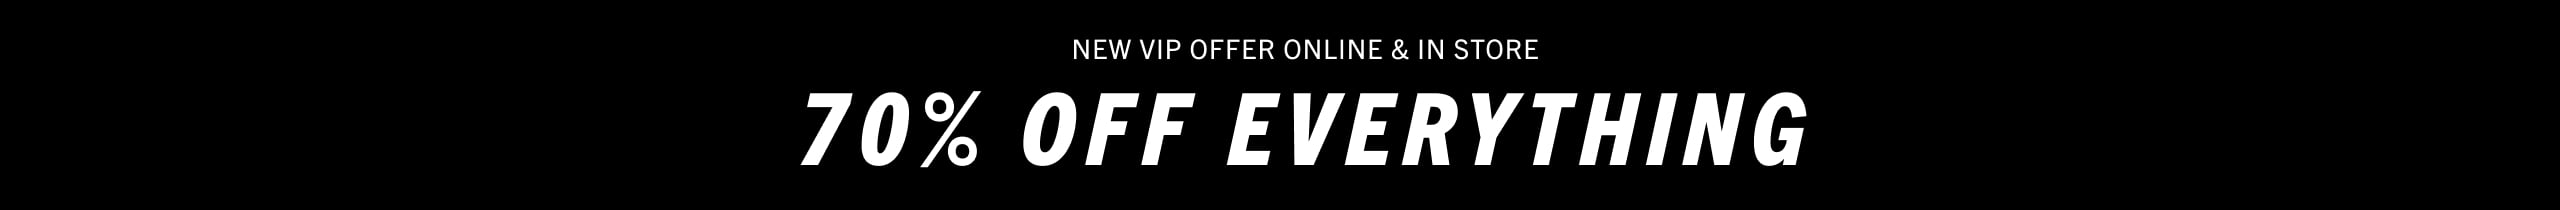 New vip offer online and in store: 70% off everything